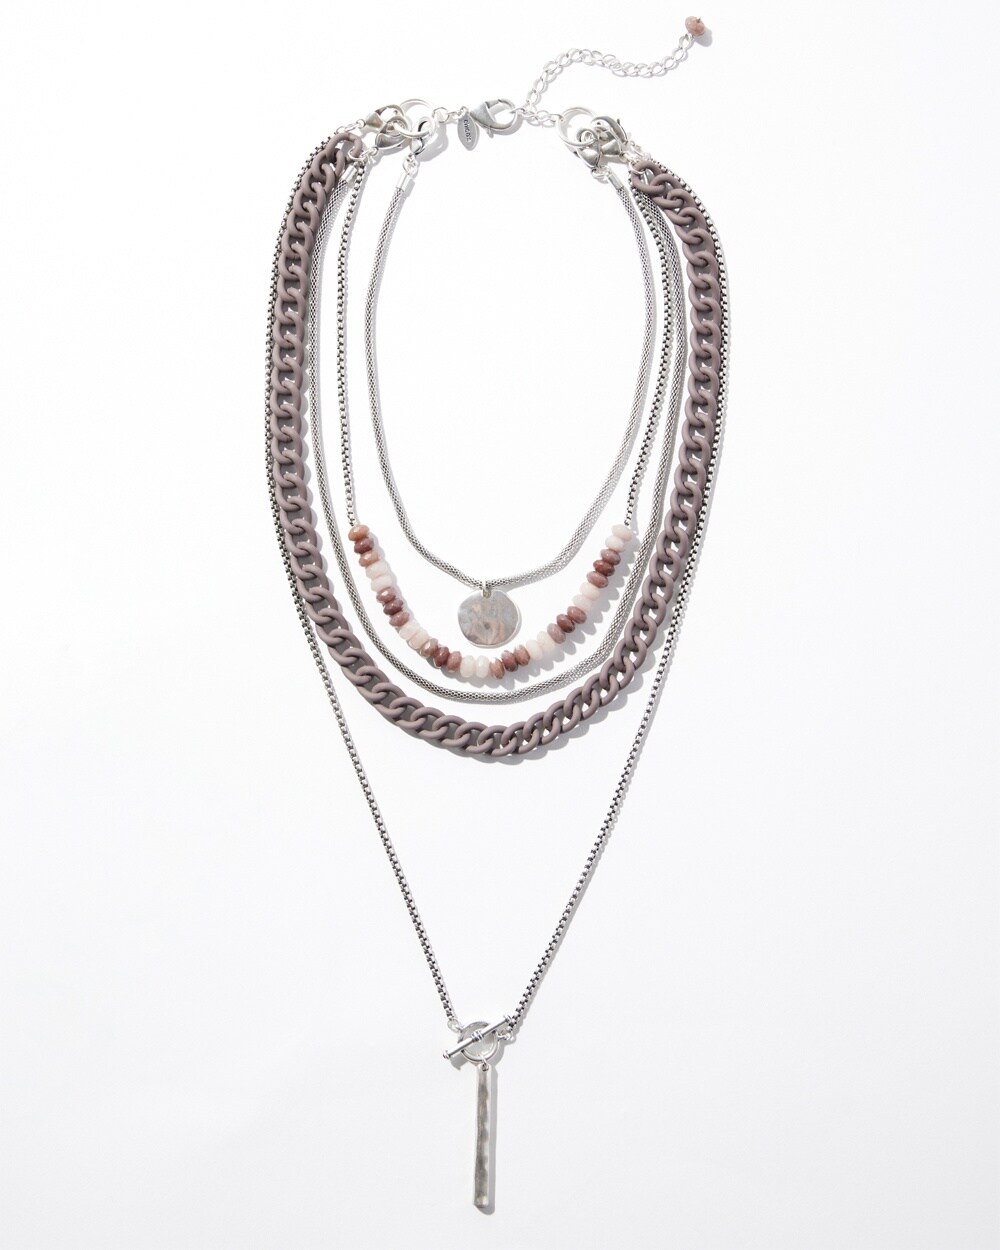 Multistrand Convertible Necklace